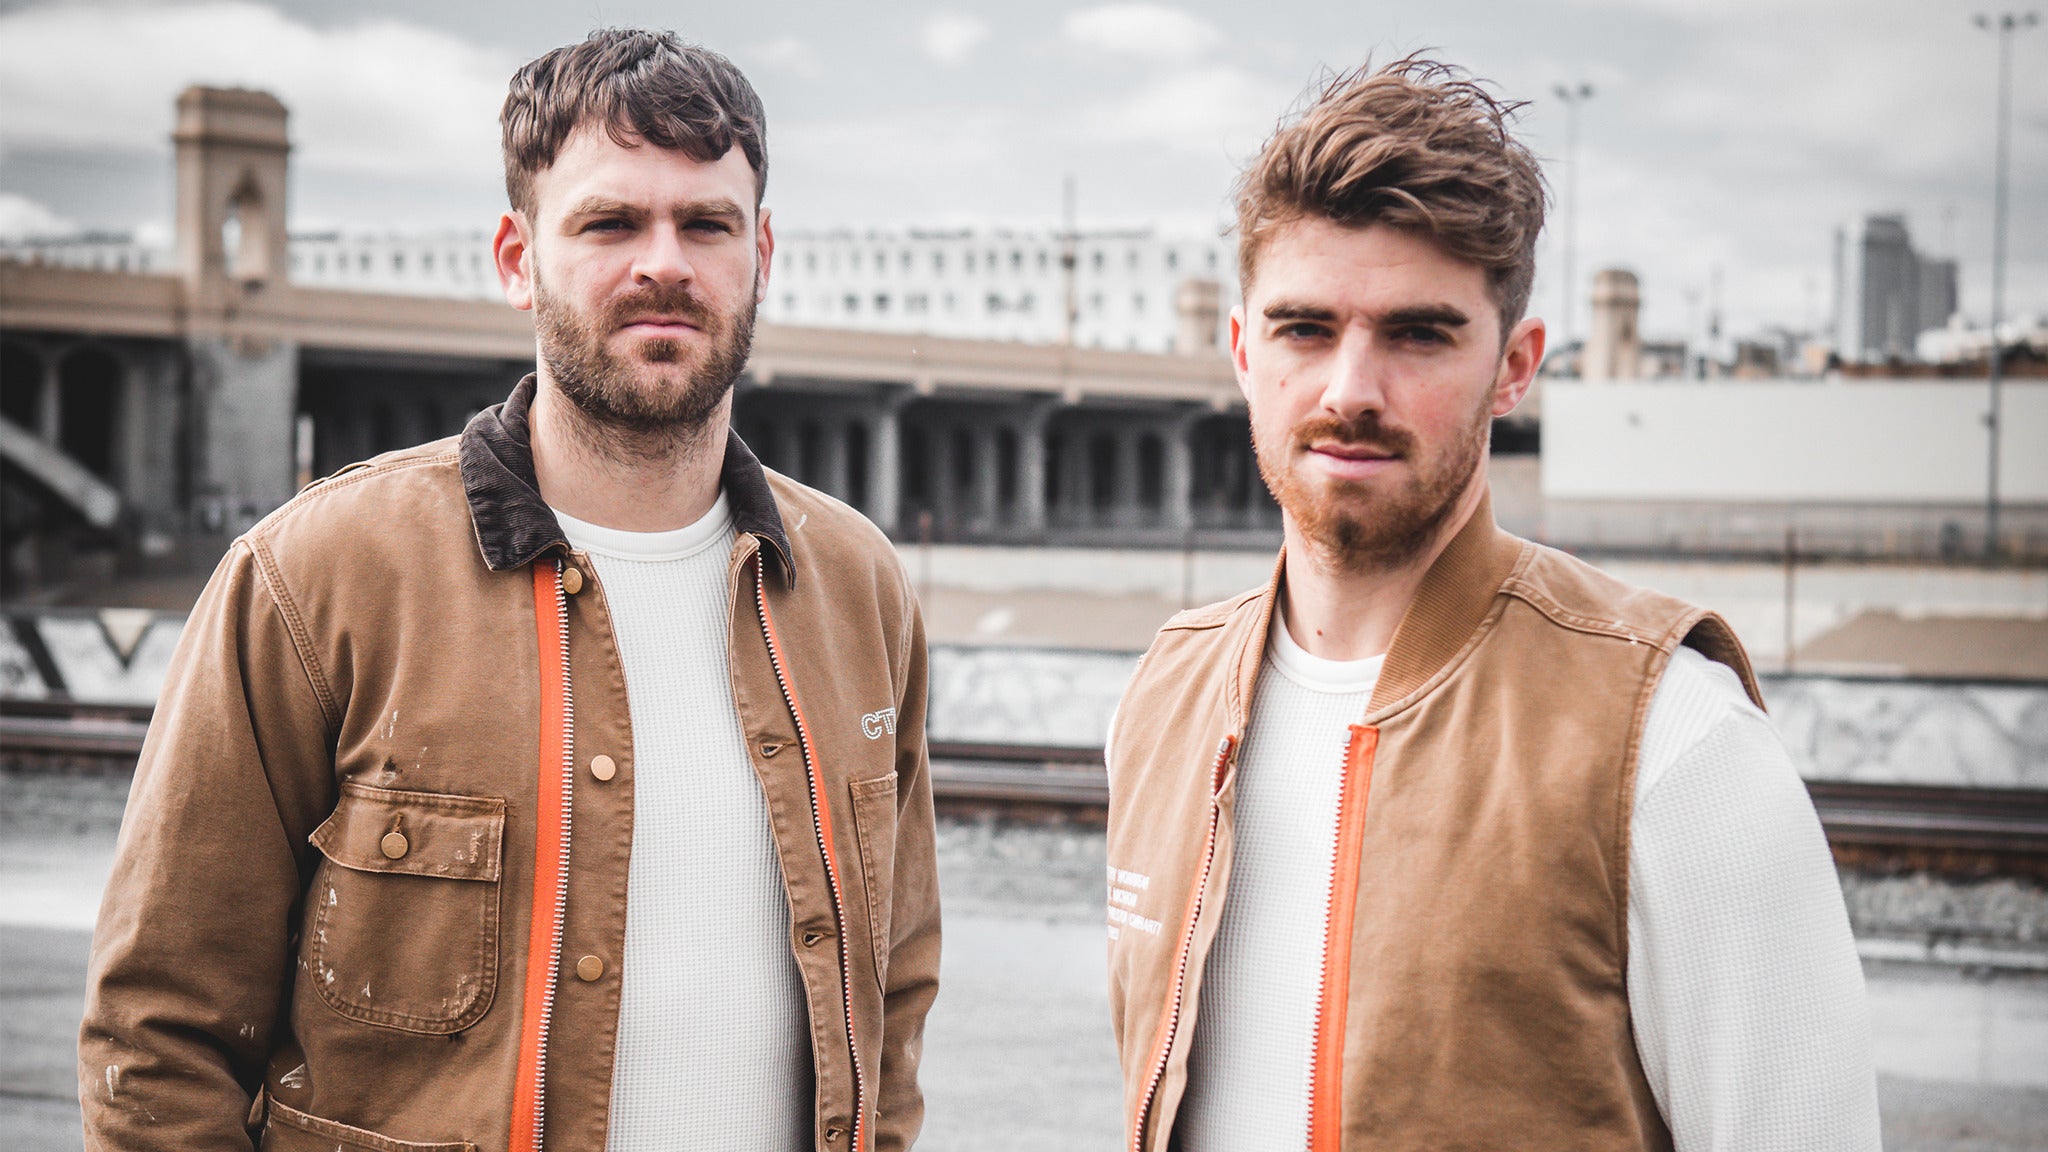 The Chainsmokers in San Francisco promo photo for APE presale offer code